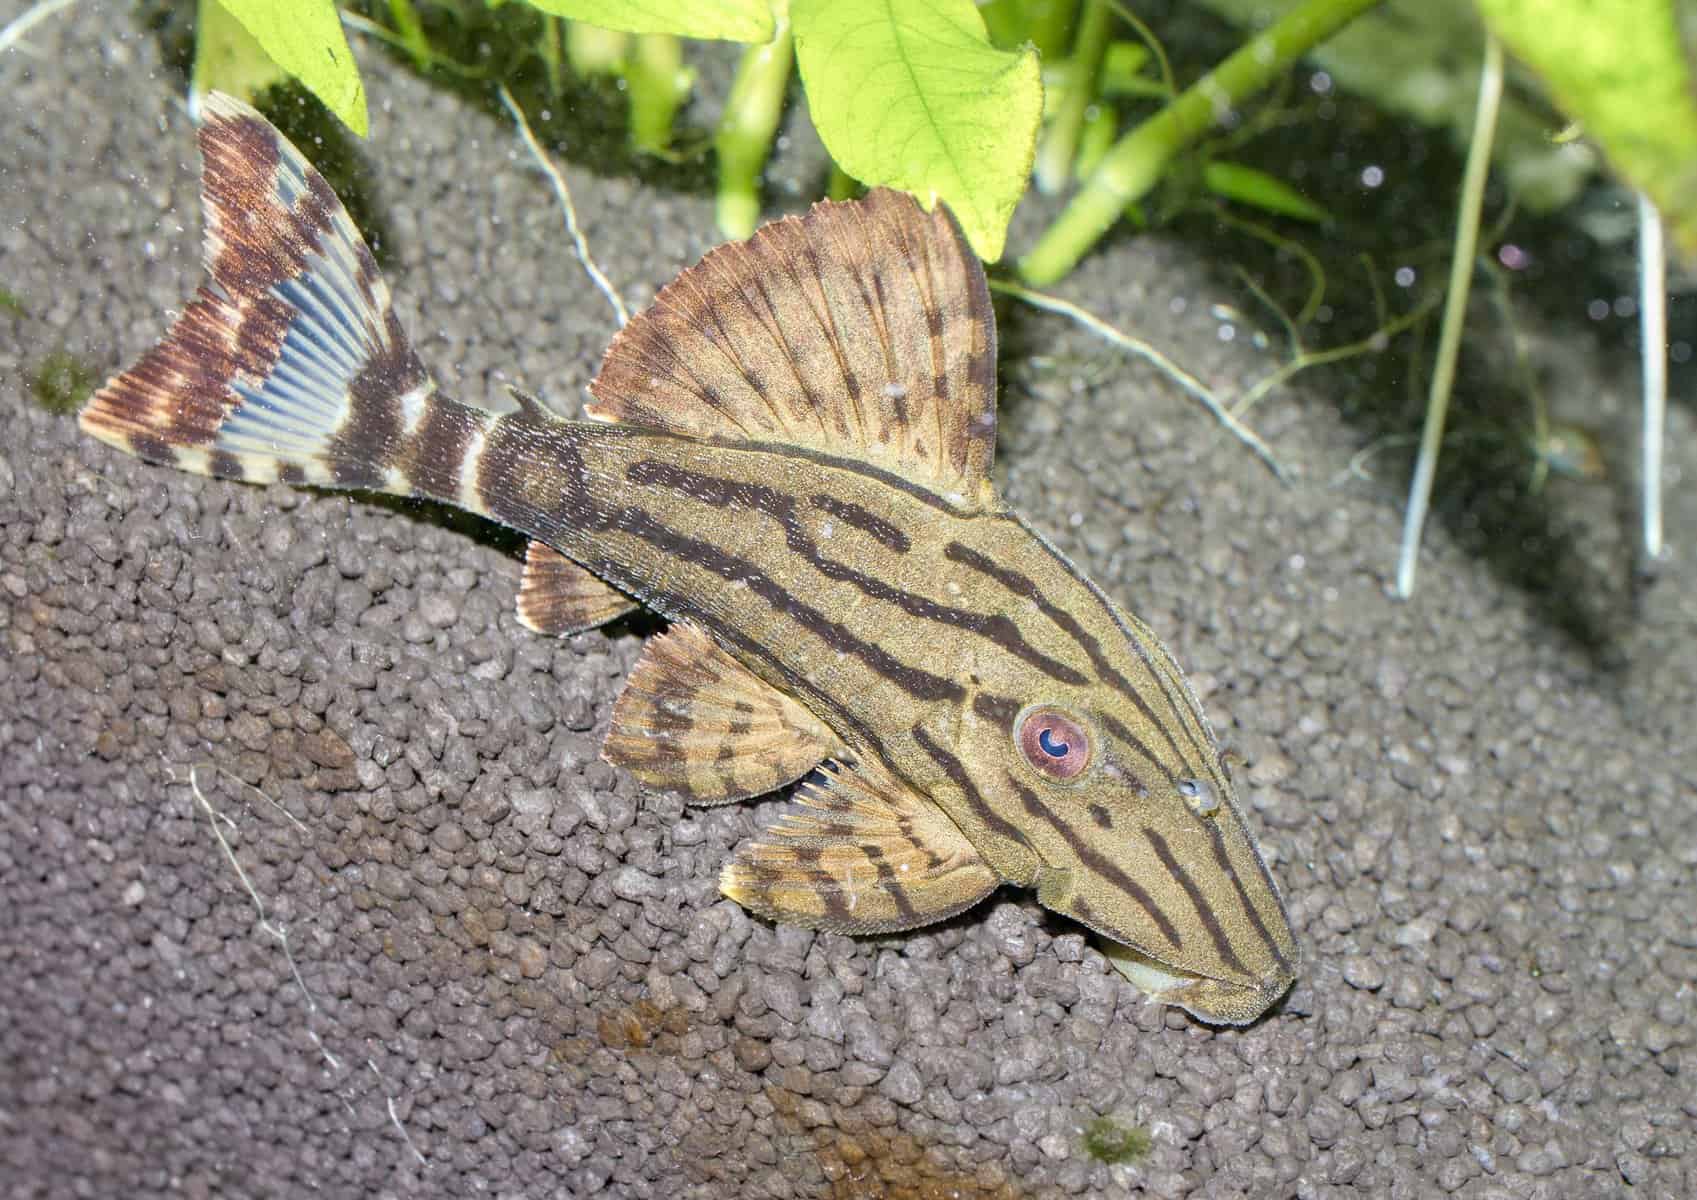 Can a Plecostomus Live With a Betta Fish? 2